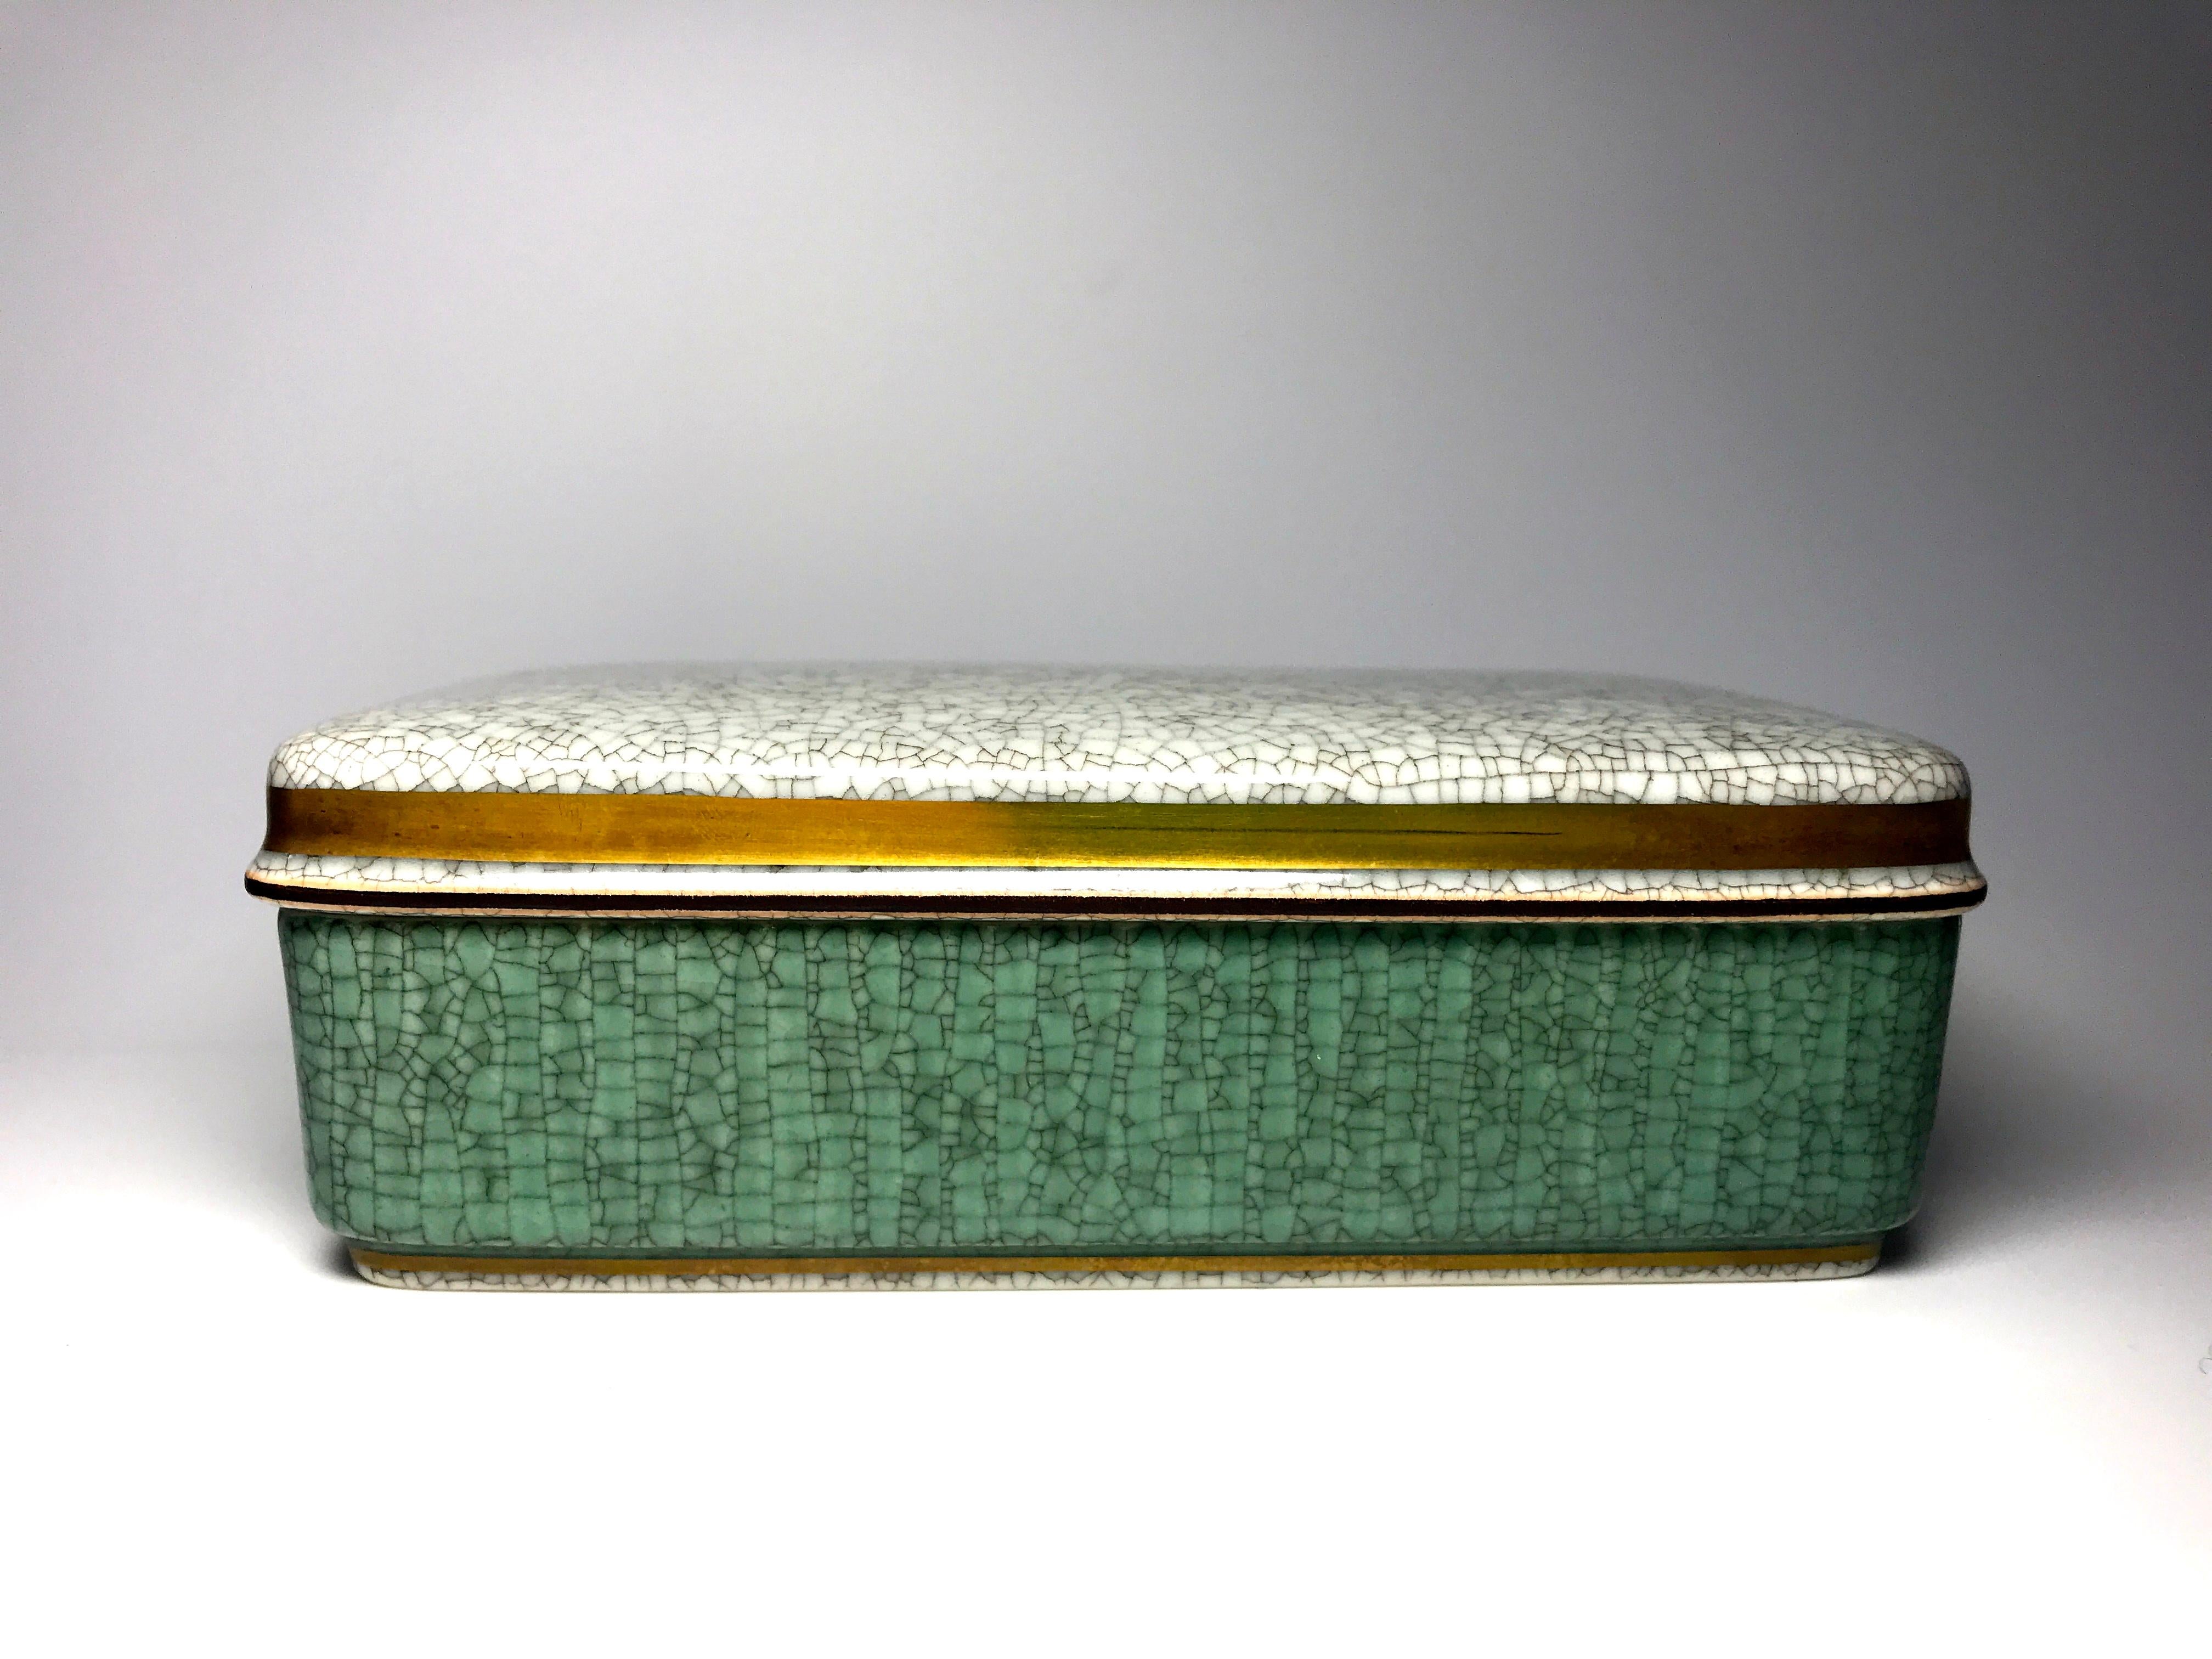 Royal Copenhagen green crackle glaze, oblong porcelain box with grey crackle glaze lid. Decorated with gilt banding. 
Danish understated elegance
Dated 1959
Signed and numbered 3630 
In good condition.